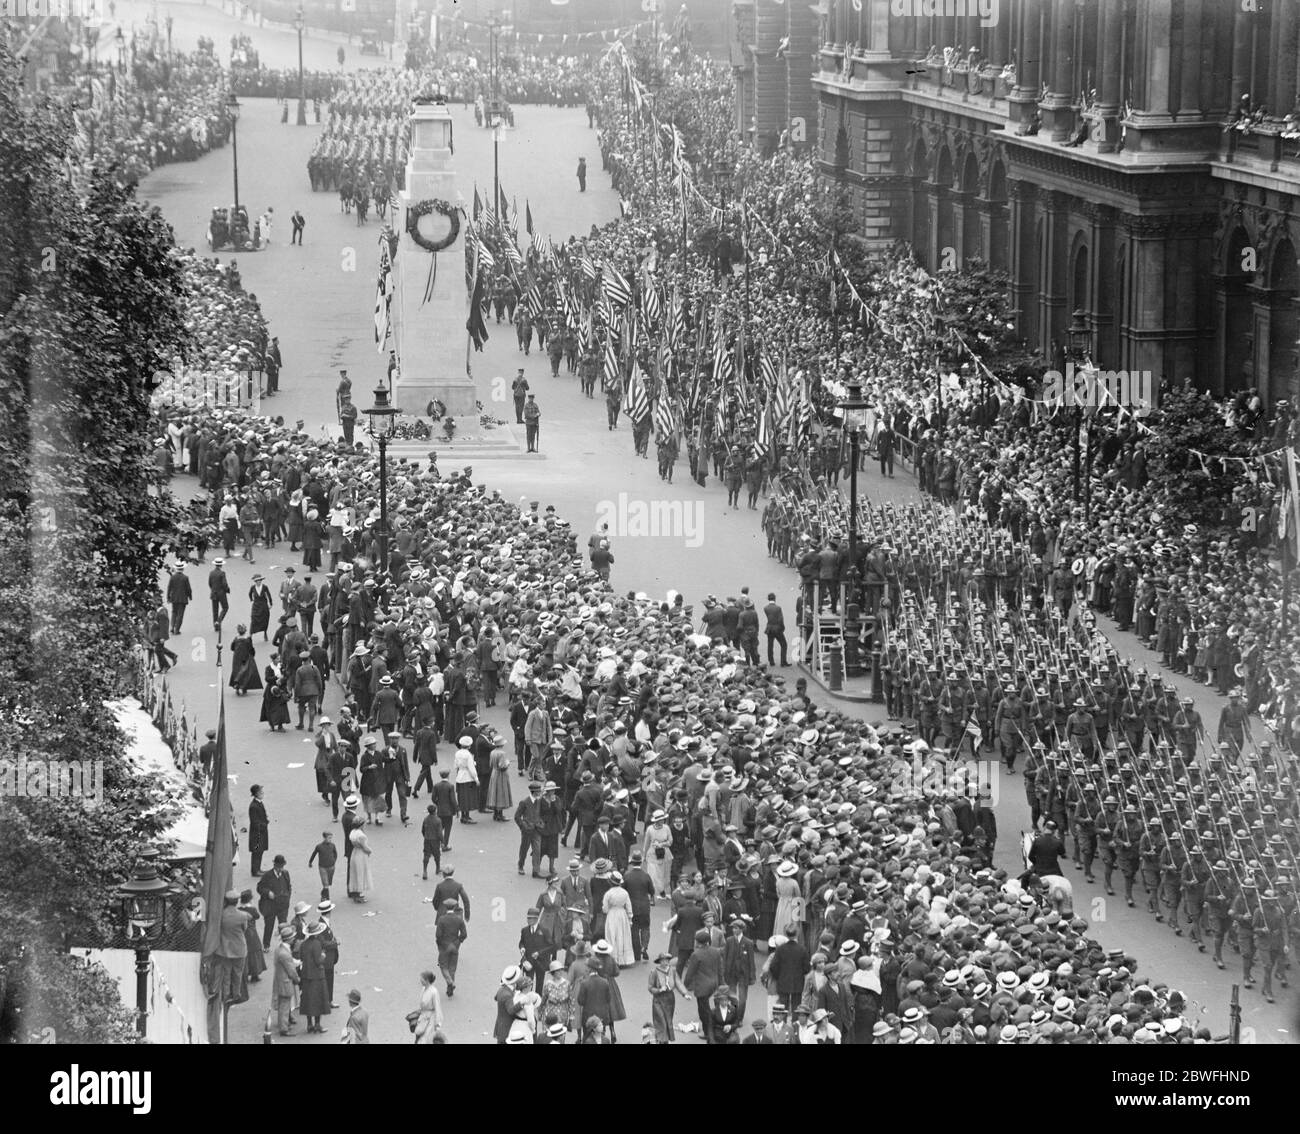 Todays great victory march . American flags and troops passing the Cenotaph , the war memorial located in Whitehall , London . 19 July 1919 Stock Photo